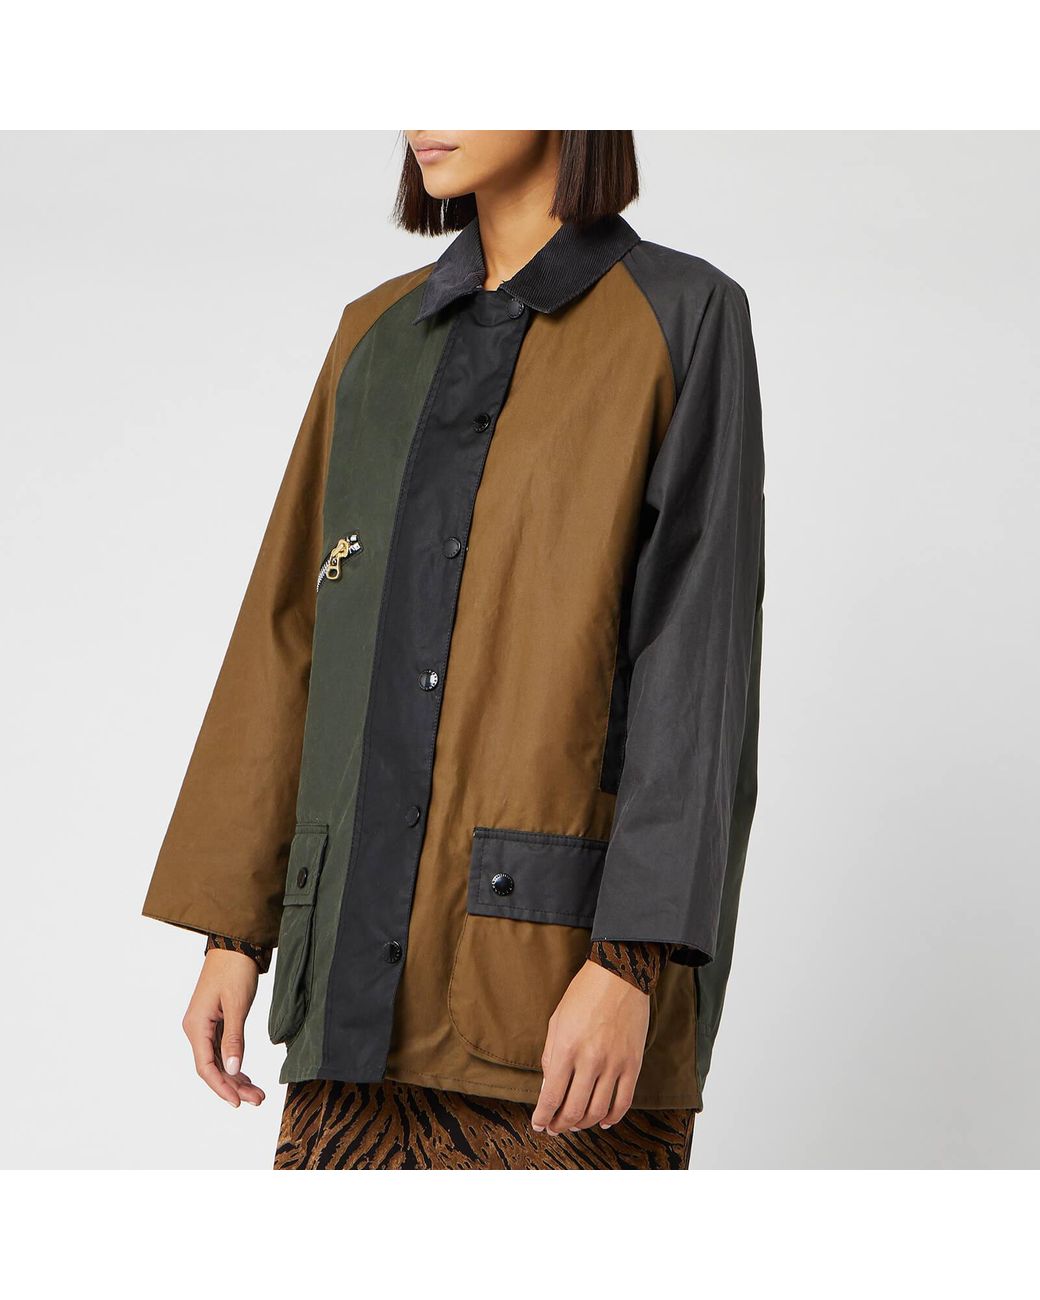 Barbour Alexa Chung Patch Wax Jacket | Lyst Canada